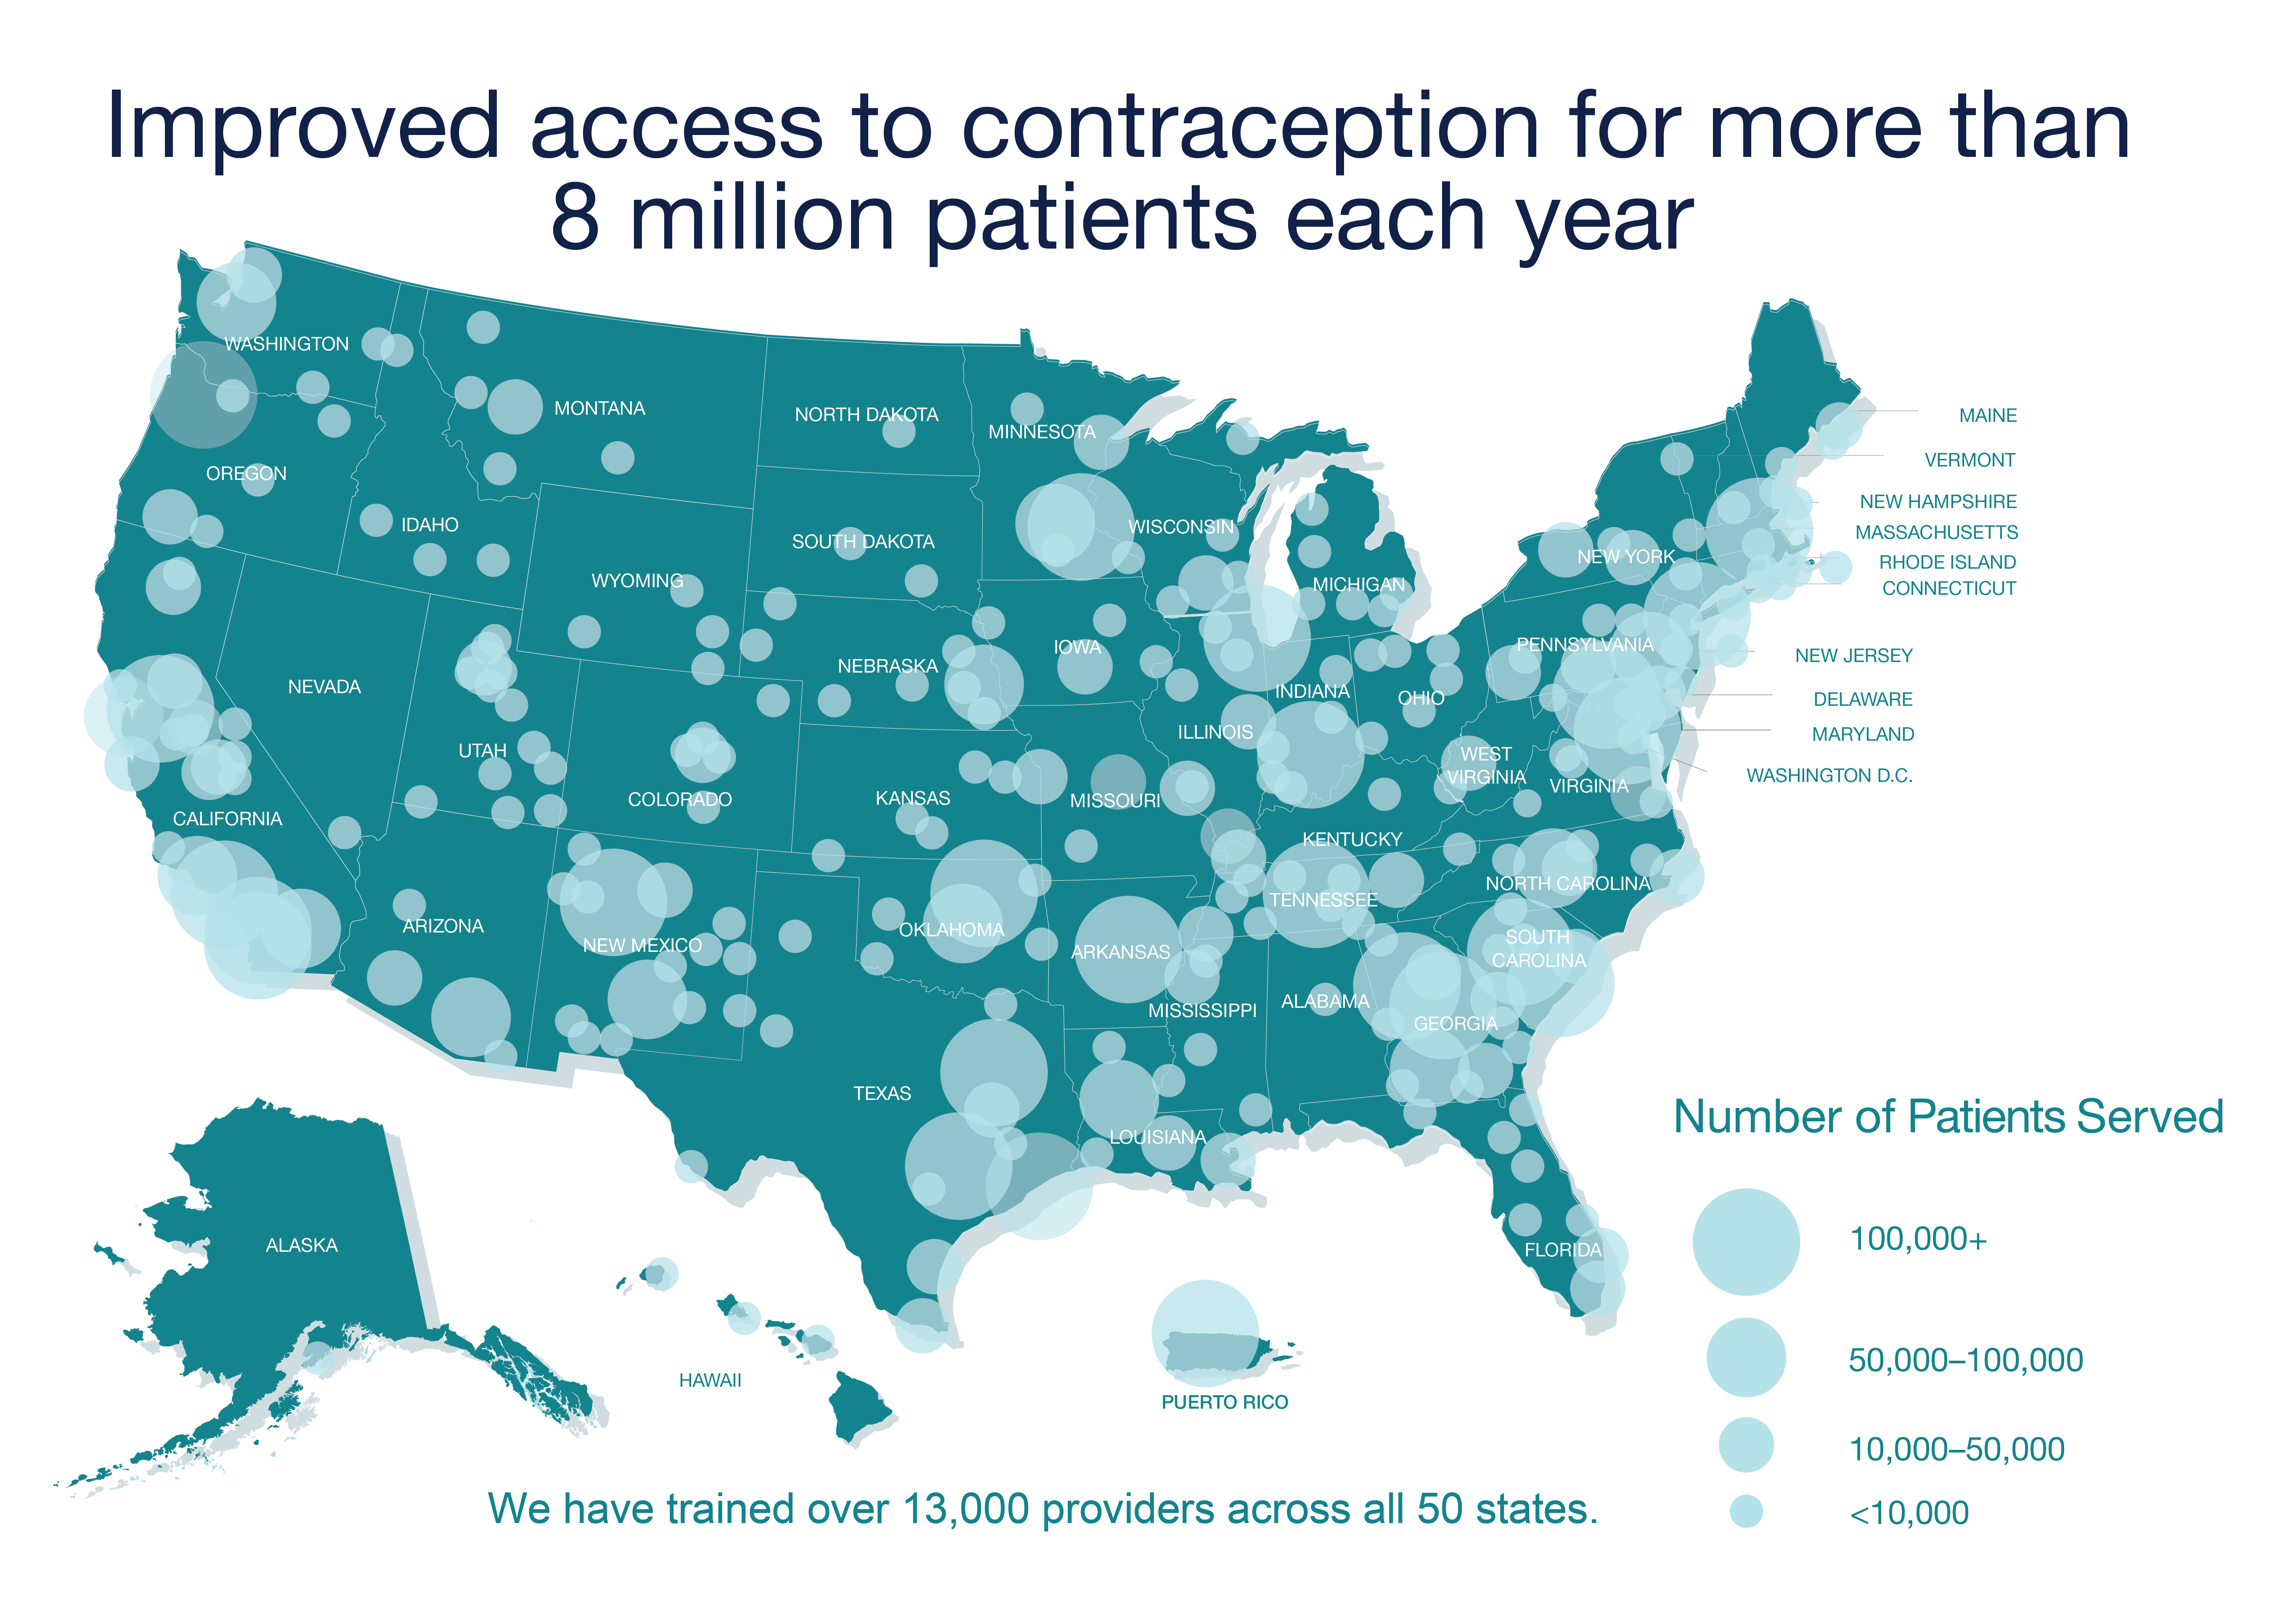 Map of the United States showing locations of Beyond the Pill trainings